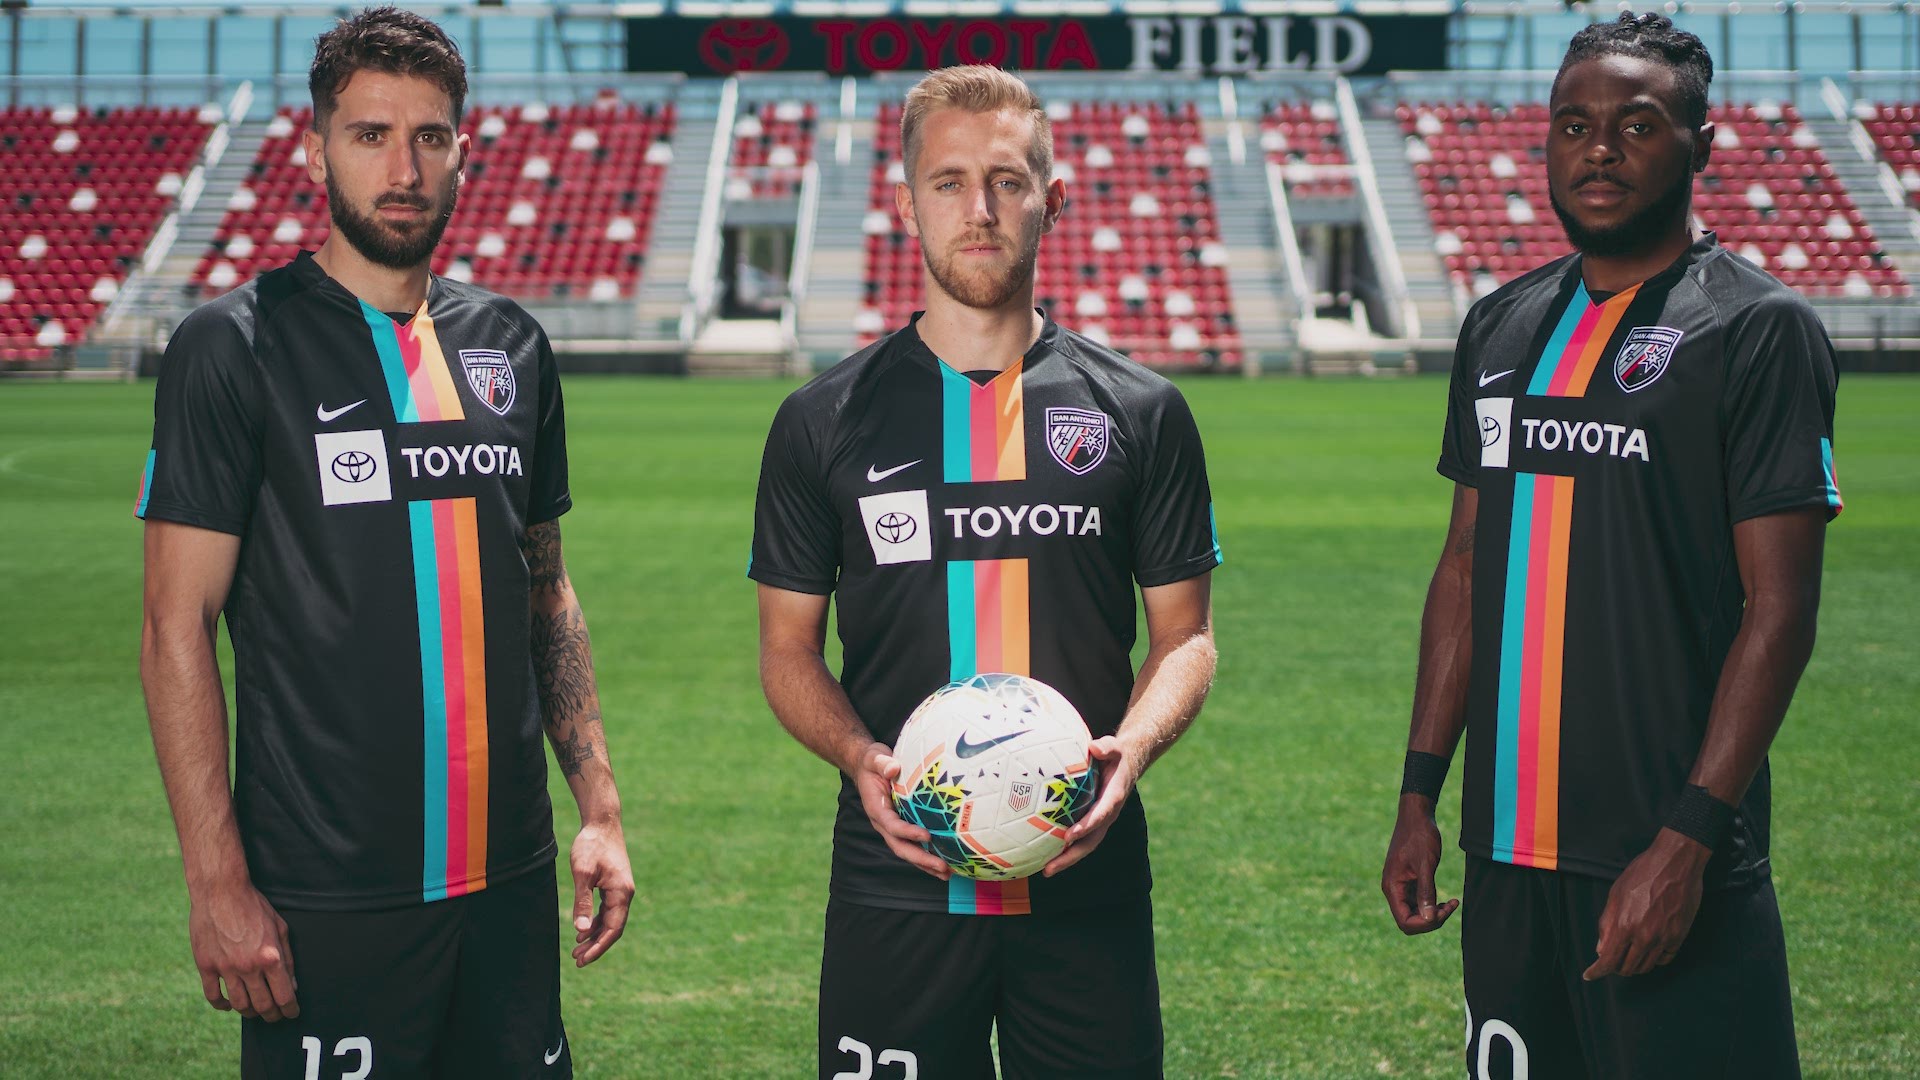 The club will be putting on alternate jerseys during the events to celebrate San Antonio pride, as they did Saturday while playing Birmingham Legion.